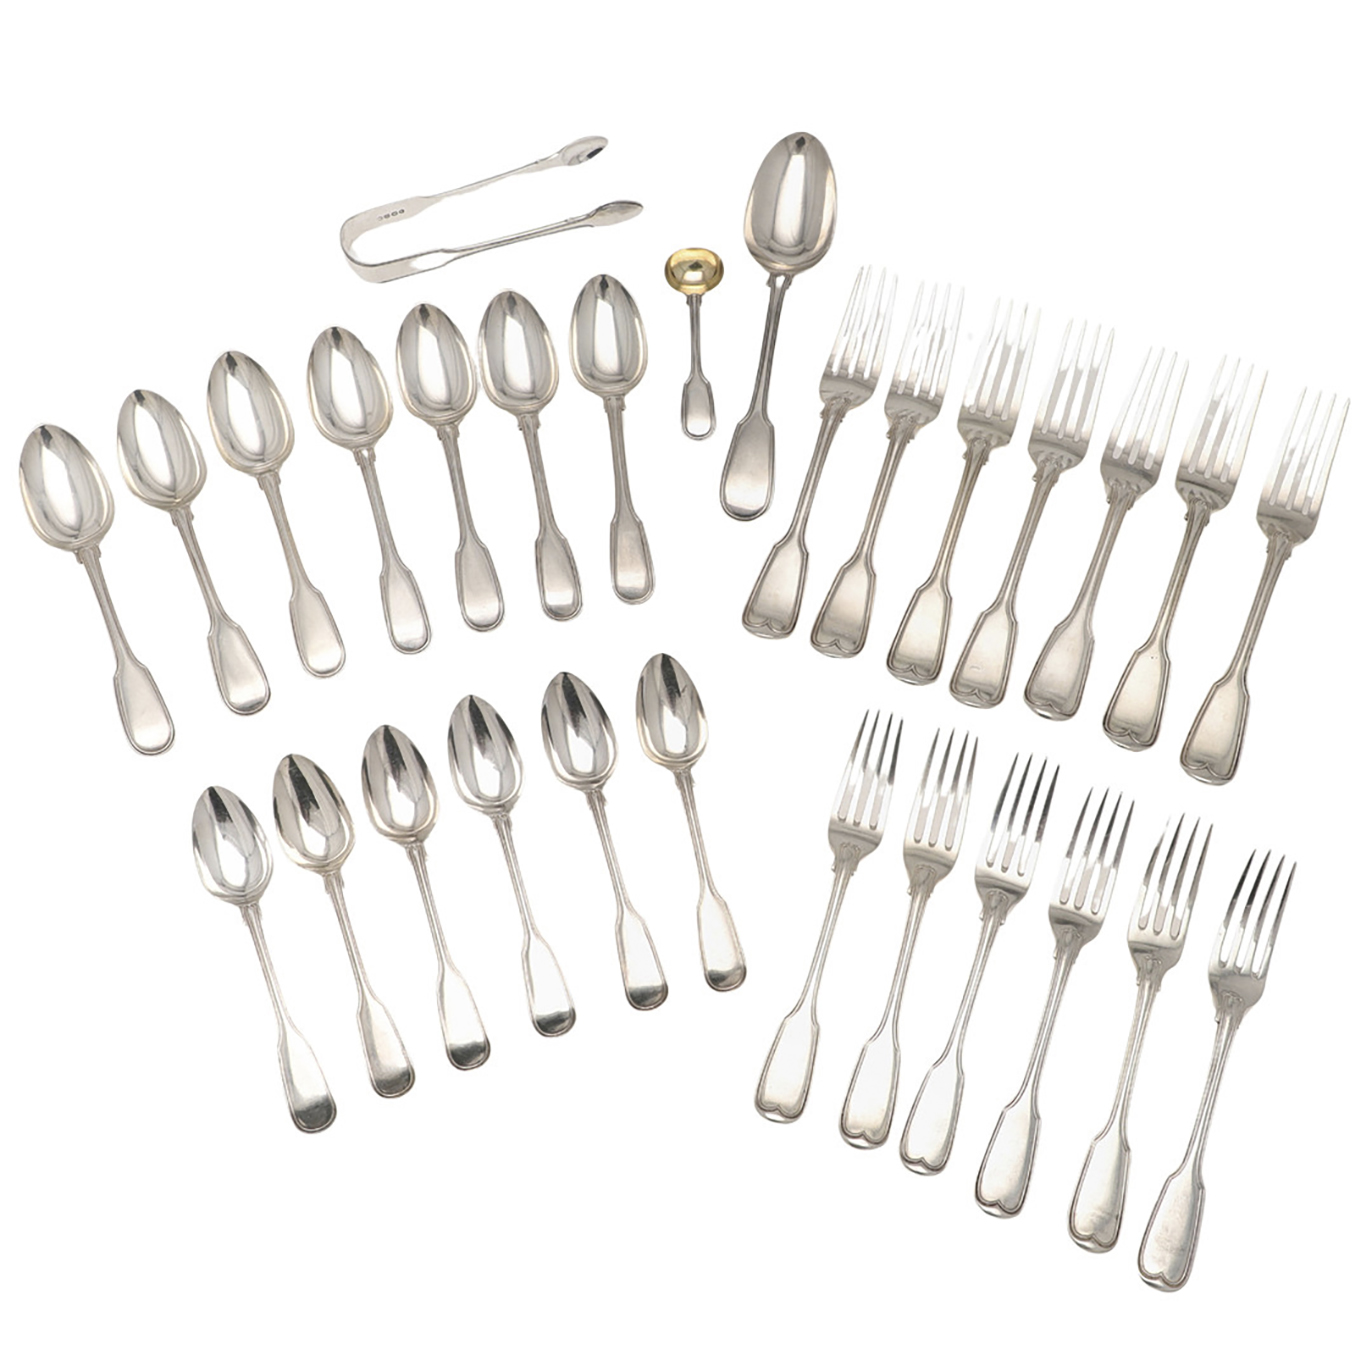 A MATCHED PART-CANTEEN OF FIDDLE & THREAD PATTERN SILVER FLATWARE.